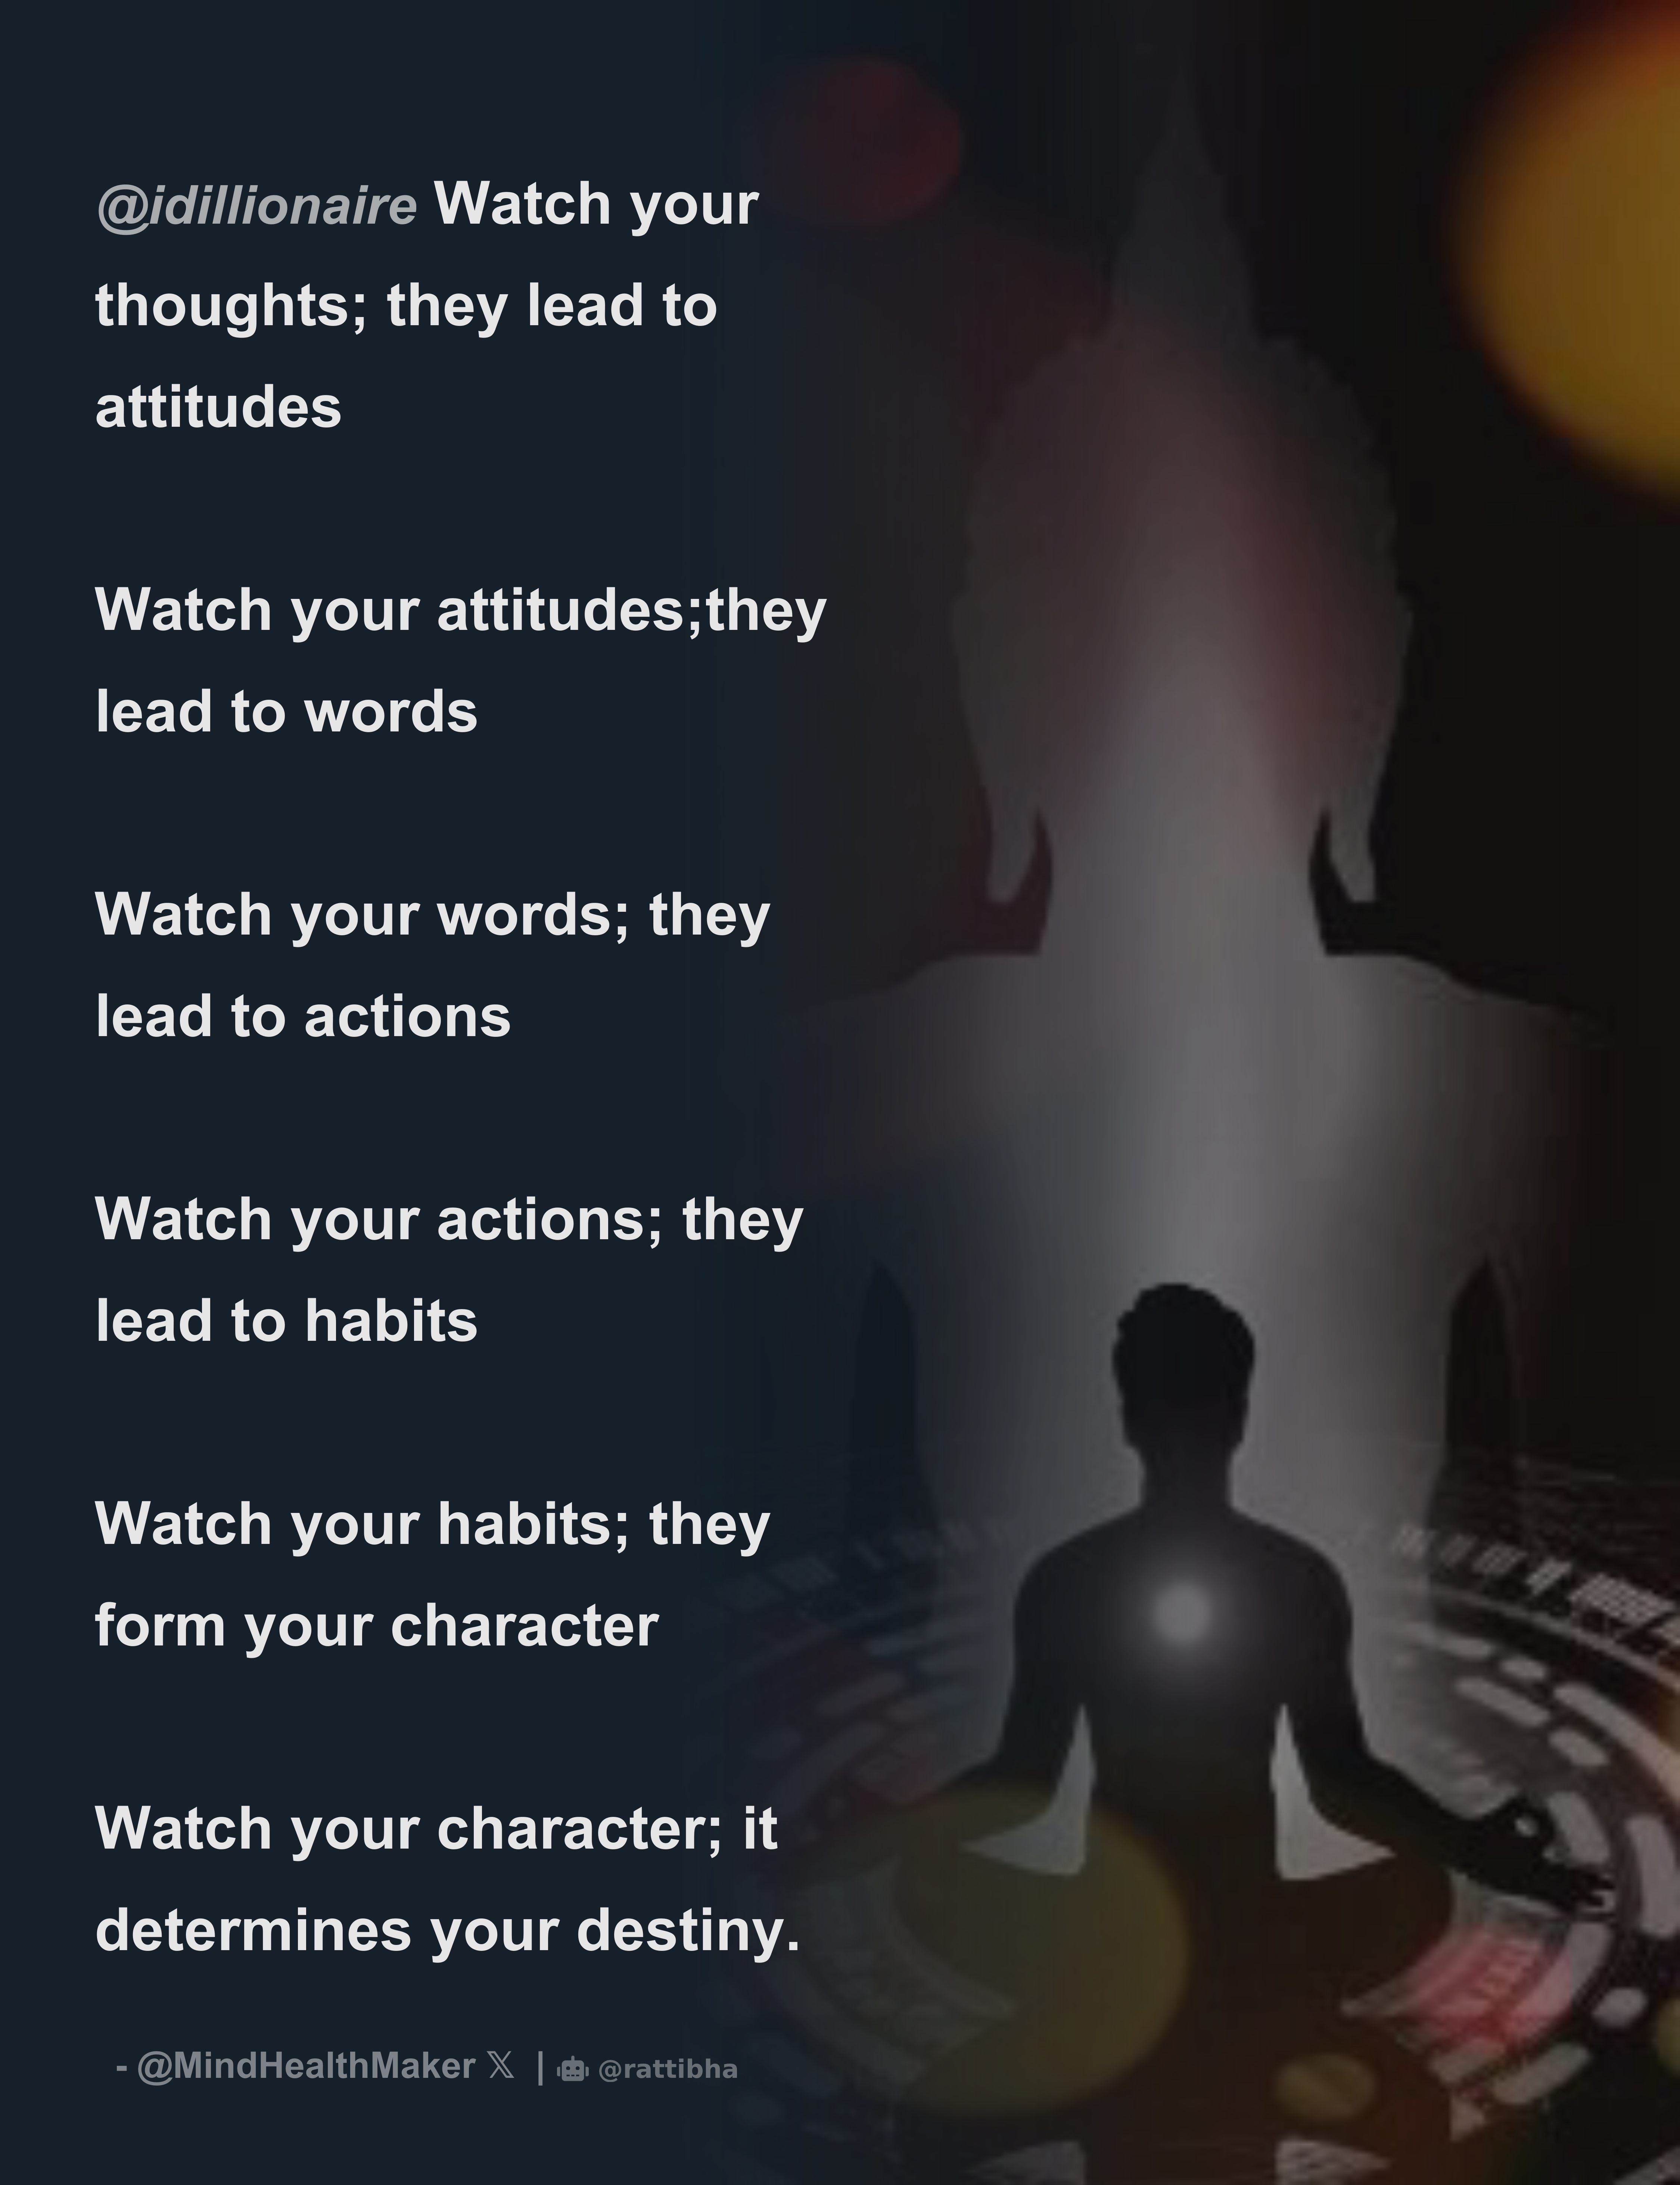 Holy Hope - “Watch your thoughts; they become words. Watch your words; they  become actions. Watch your actions; they become habits. Watch your habits;  they become character. Watch you character; it becomes